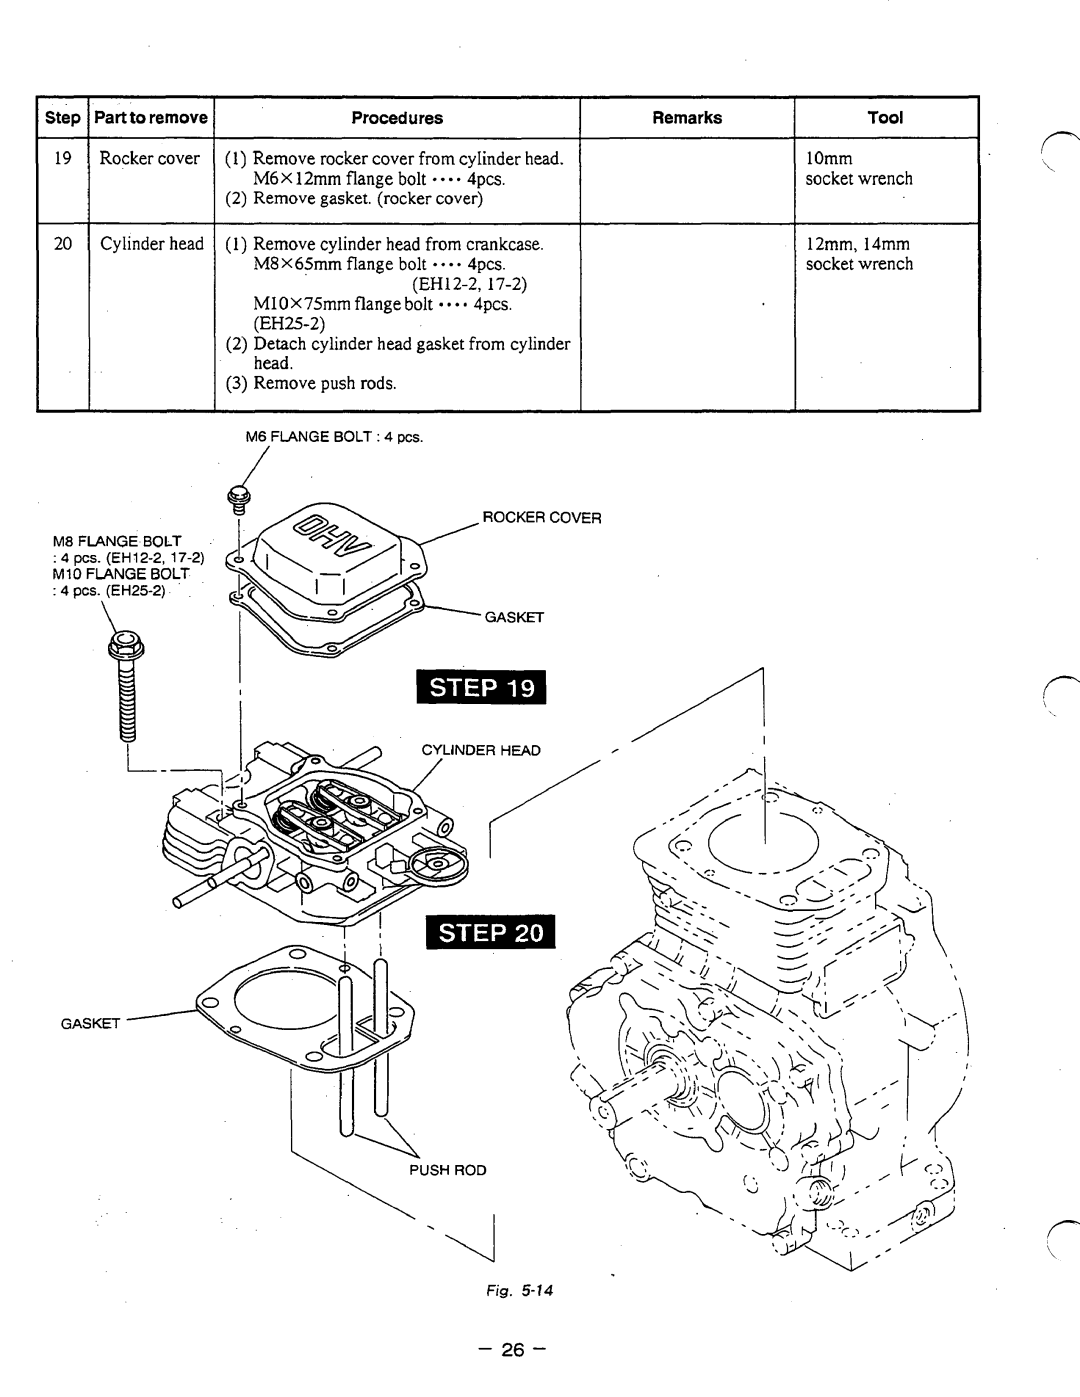 Subaru Robin Power Products EH12-2, EH17-2, EH25-2 manual Procedures, Remarks, step 